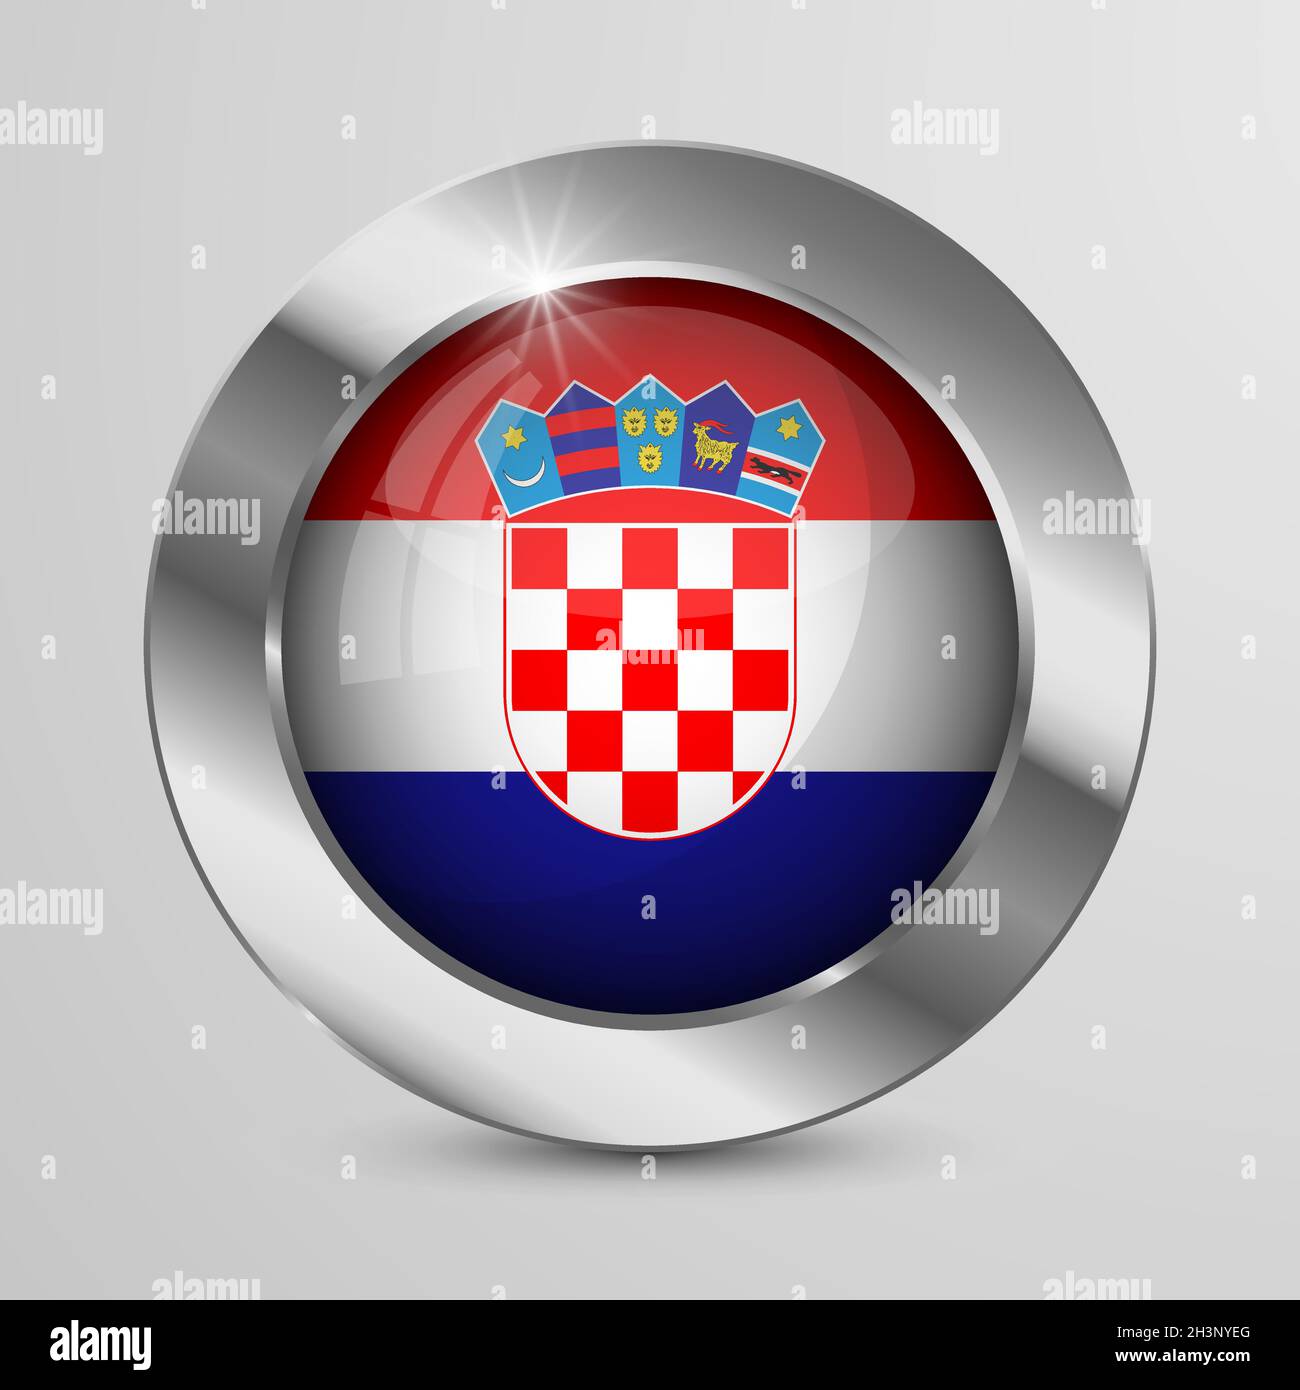 EPS10 Vector Patriotic Button with Croatia flag colors. An element of impact for the use you want to make of it. Stock Vector